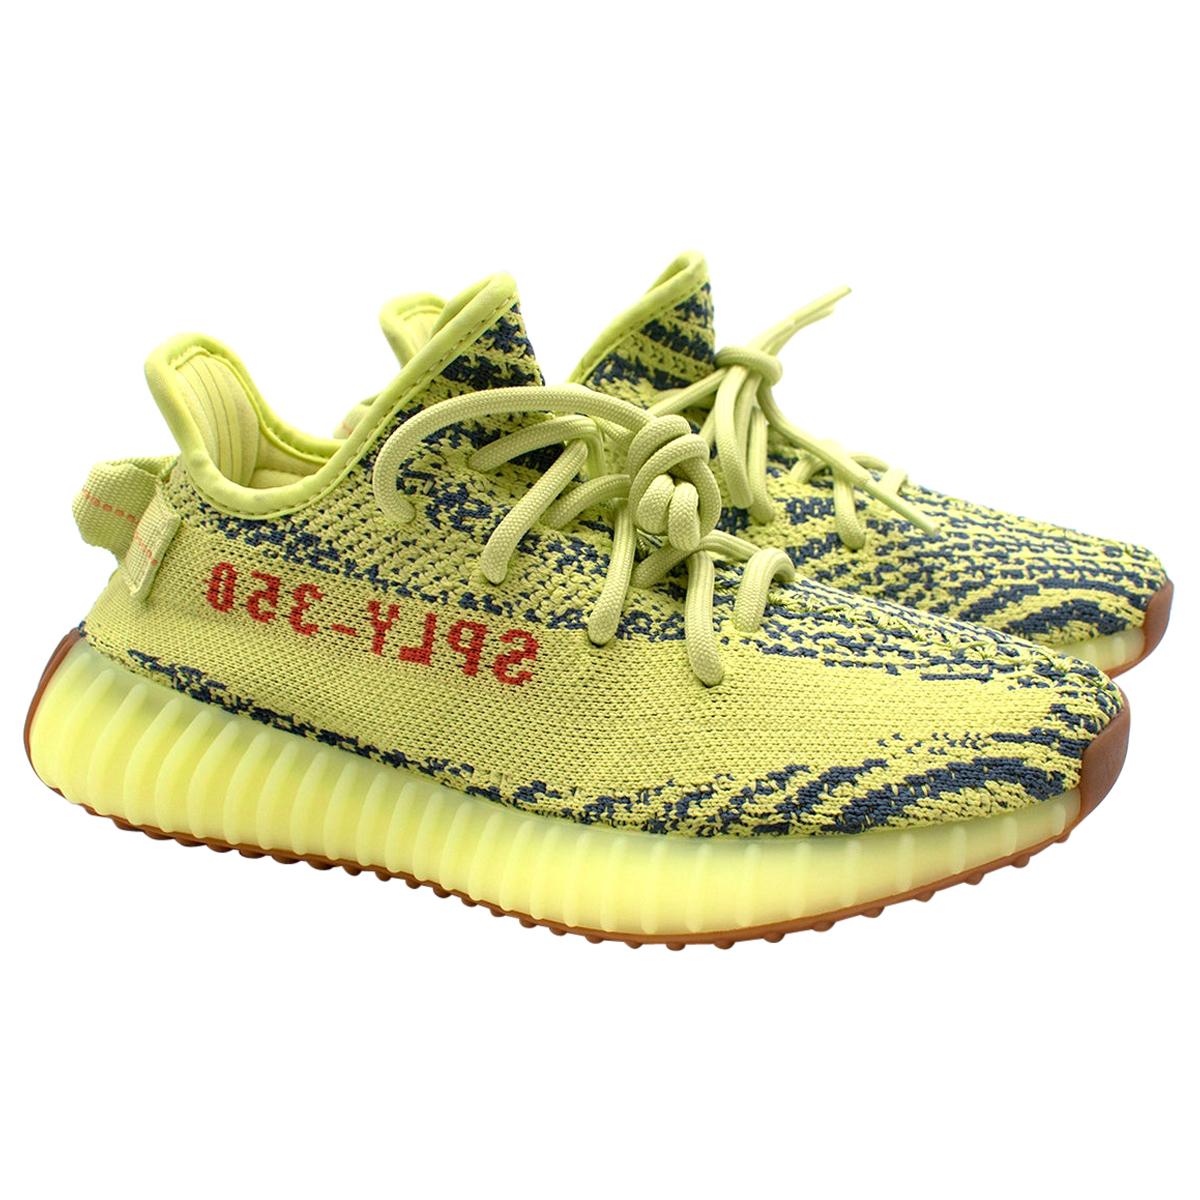 Yeezy Neon Yellow Boost 350 V2 Trainers - Us 6.5 For Sale